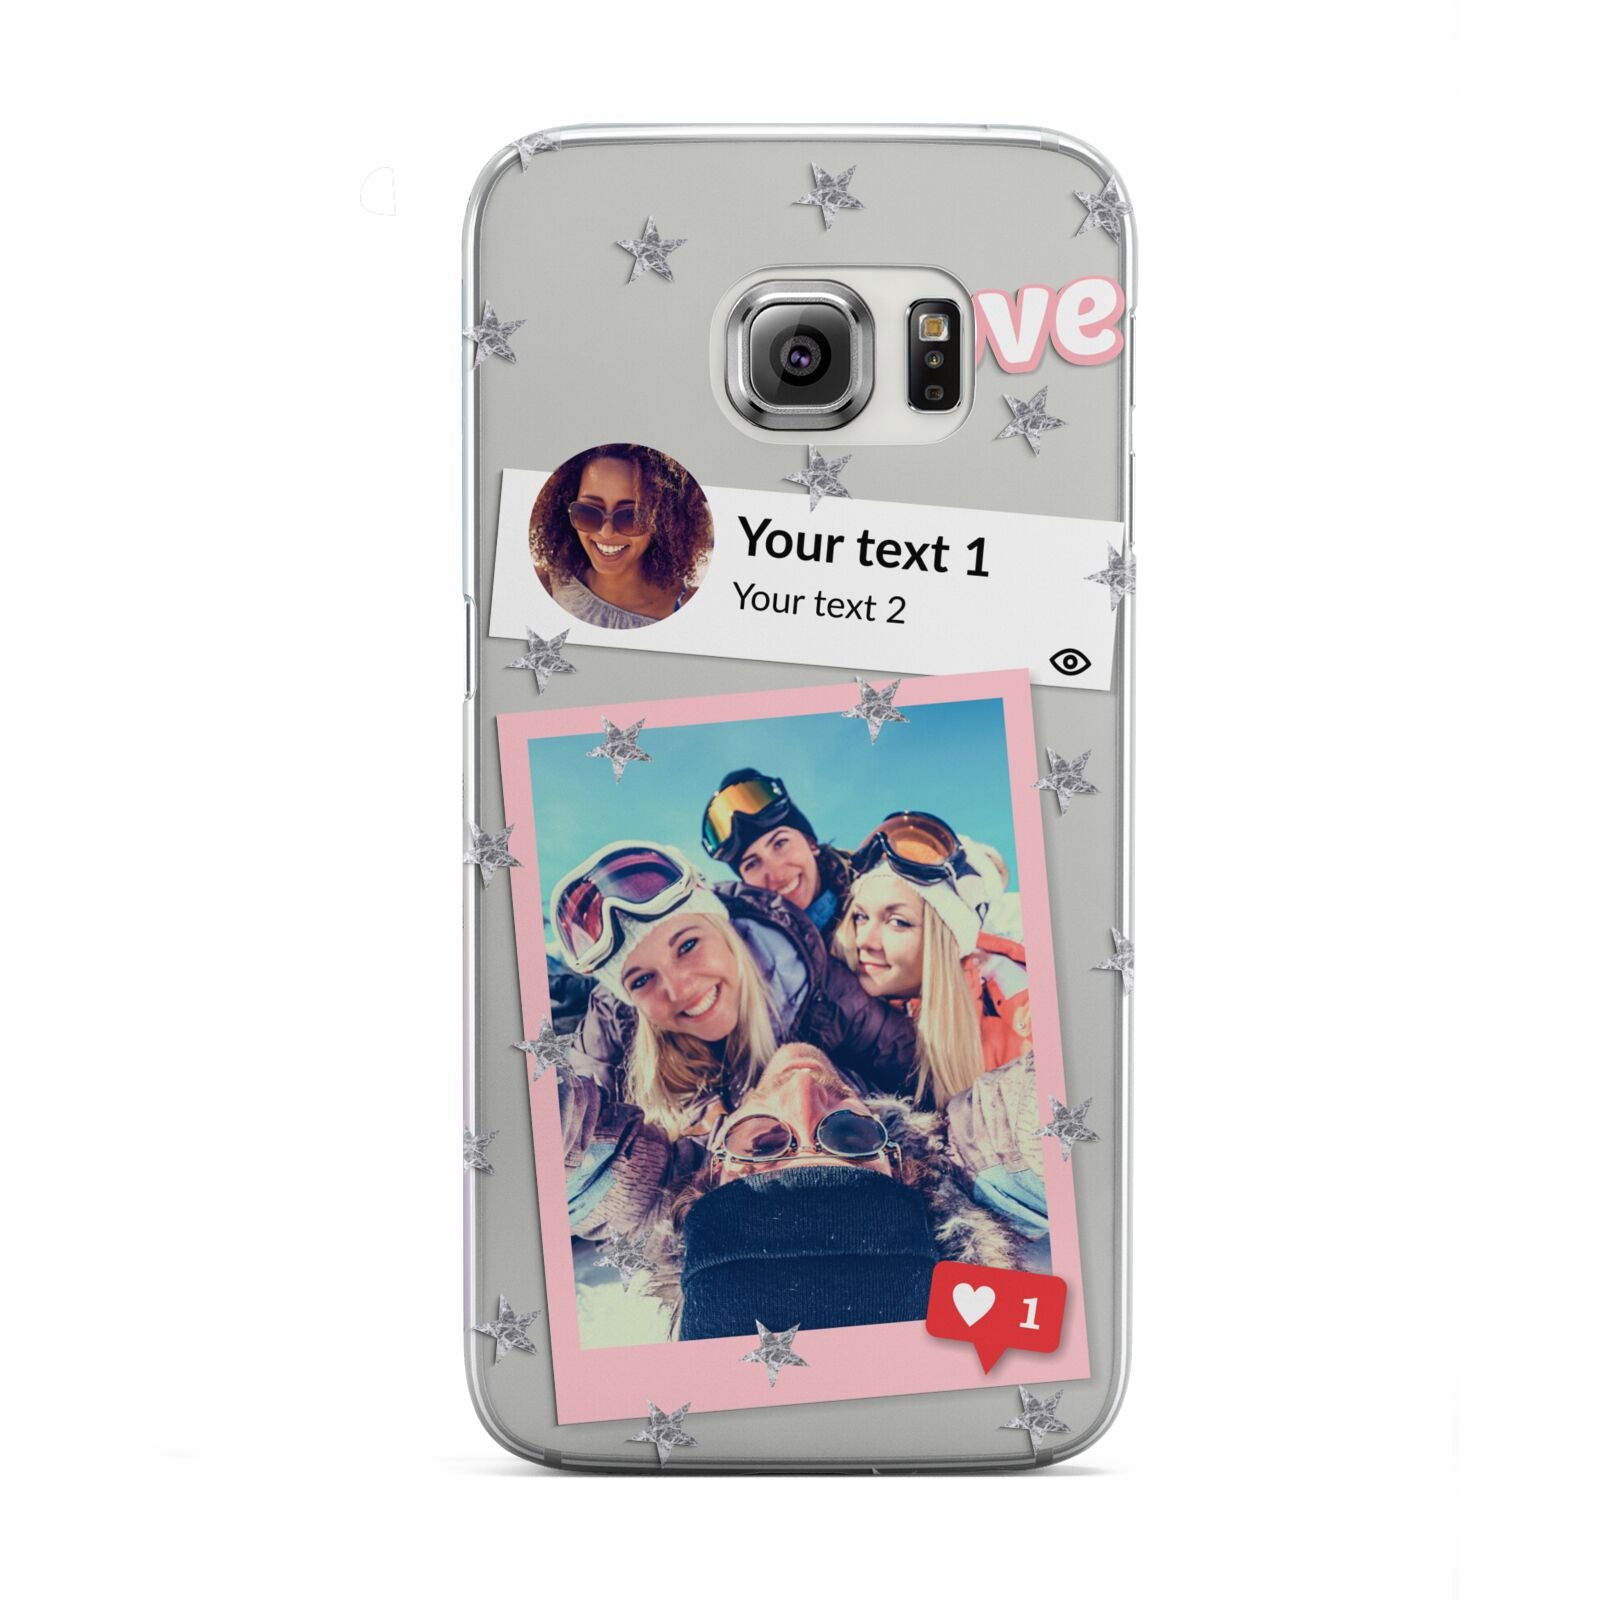 Starry Social Media Photo Montage Upload with Text Samsung Galaxy S6 Edge Case